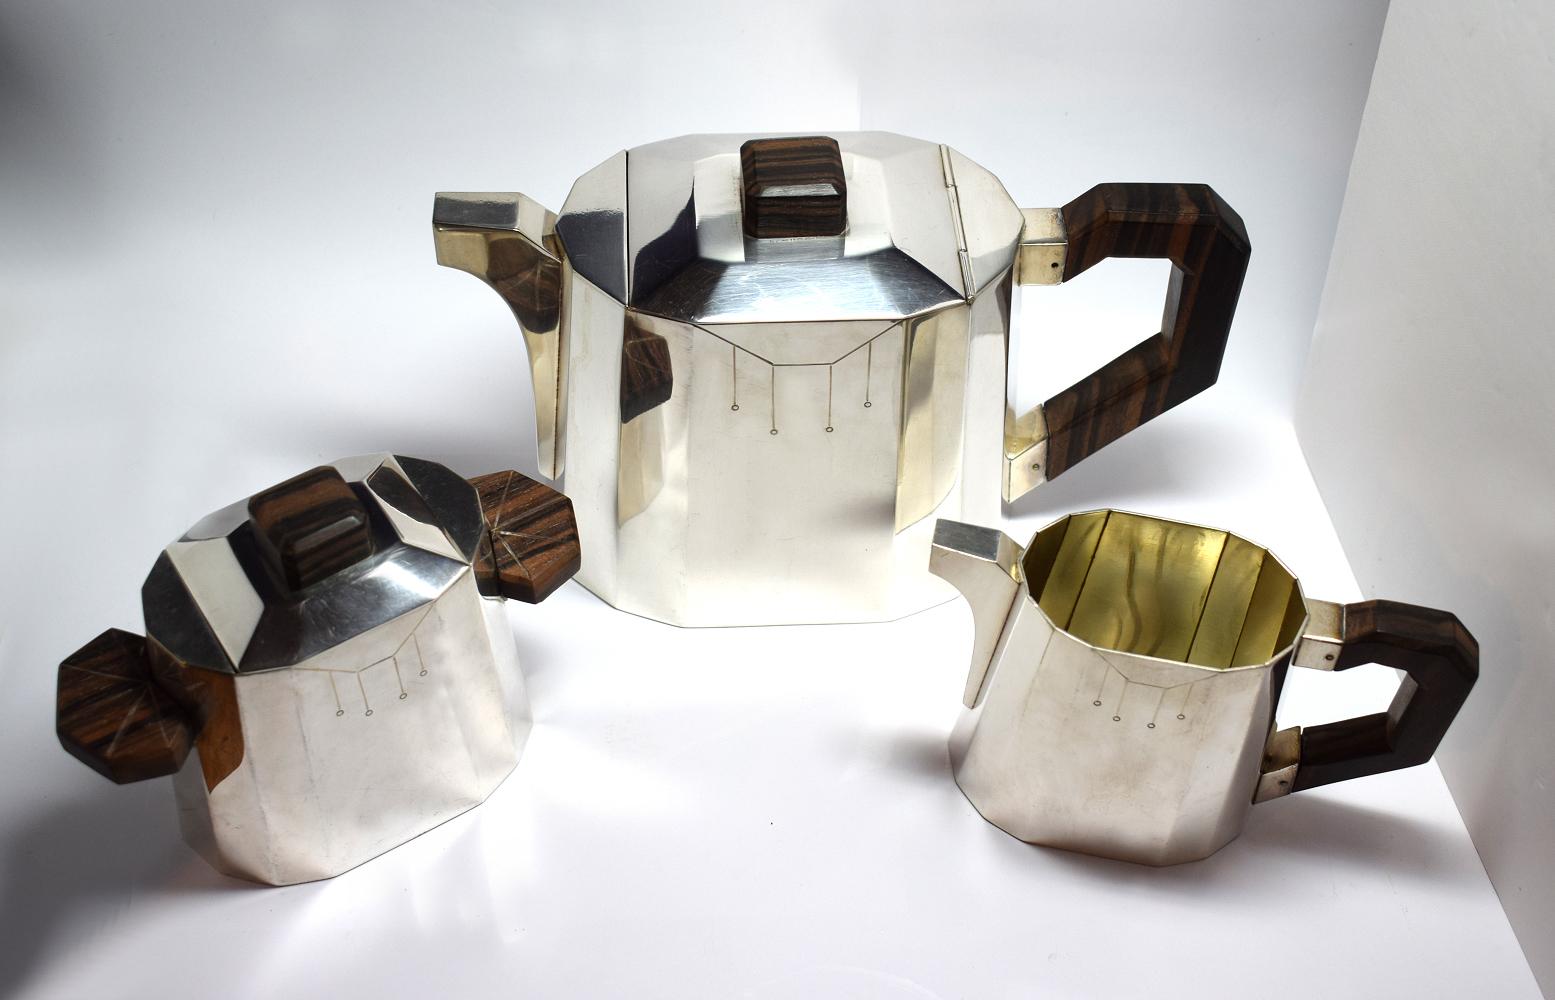 High style modernist silver plated tea set dating to the 1930s and originating from France. Silver plated with Macassar wooden accents, hall marks Goldsmith L.H. Hallmarks with a helmet - White Metal - and other Hallmarks. Comprises milk, sugar, tea